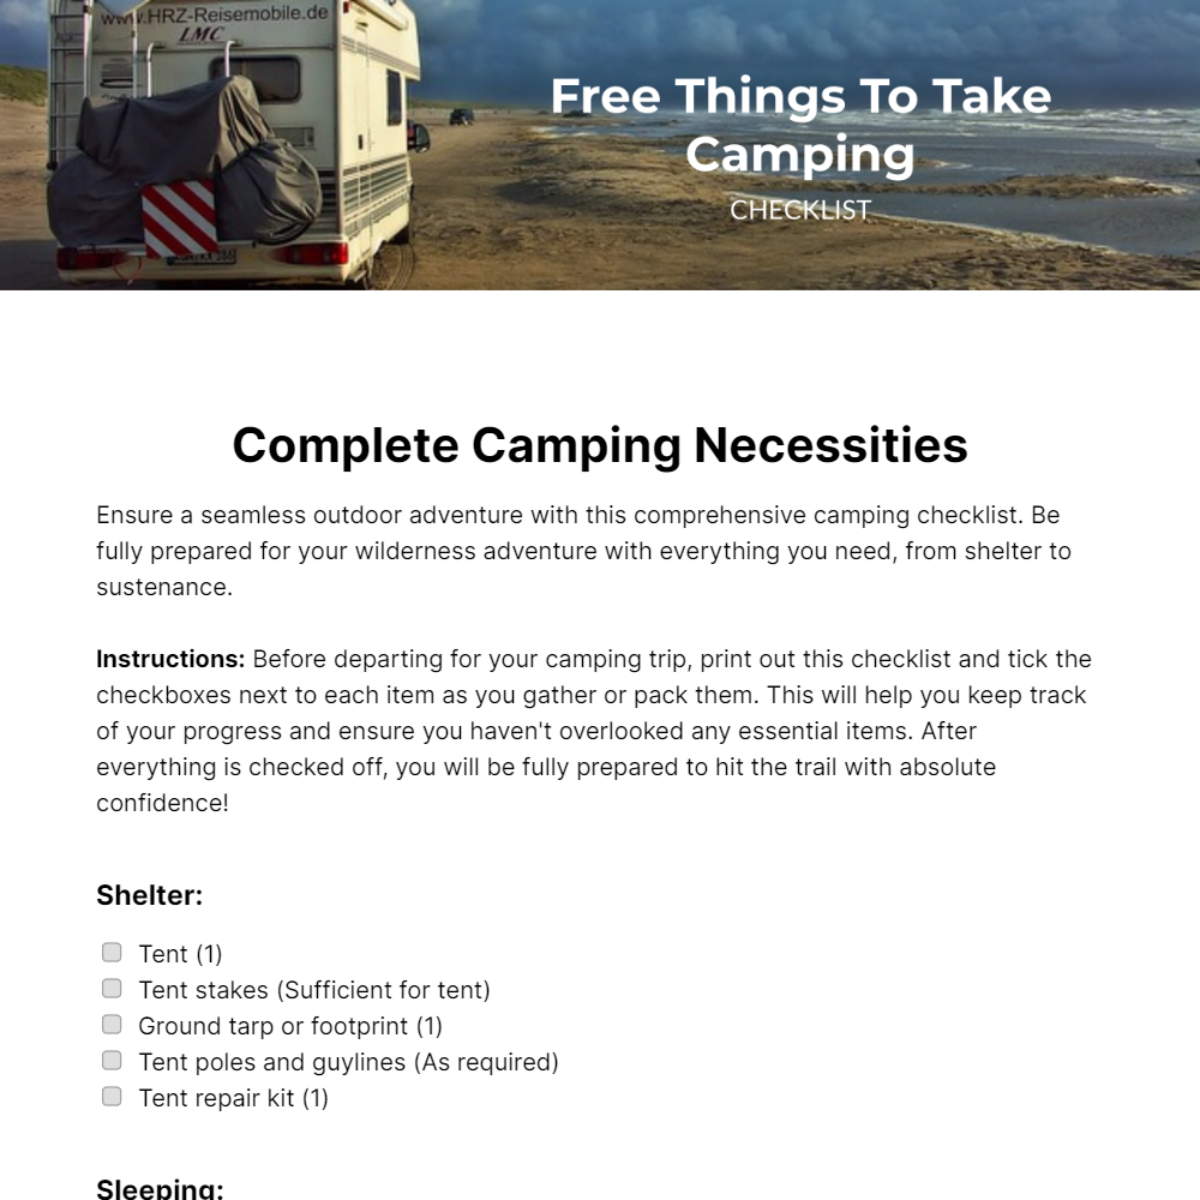 Things To Take Camping Checklist Template